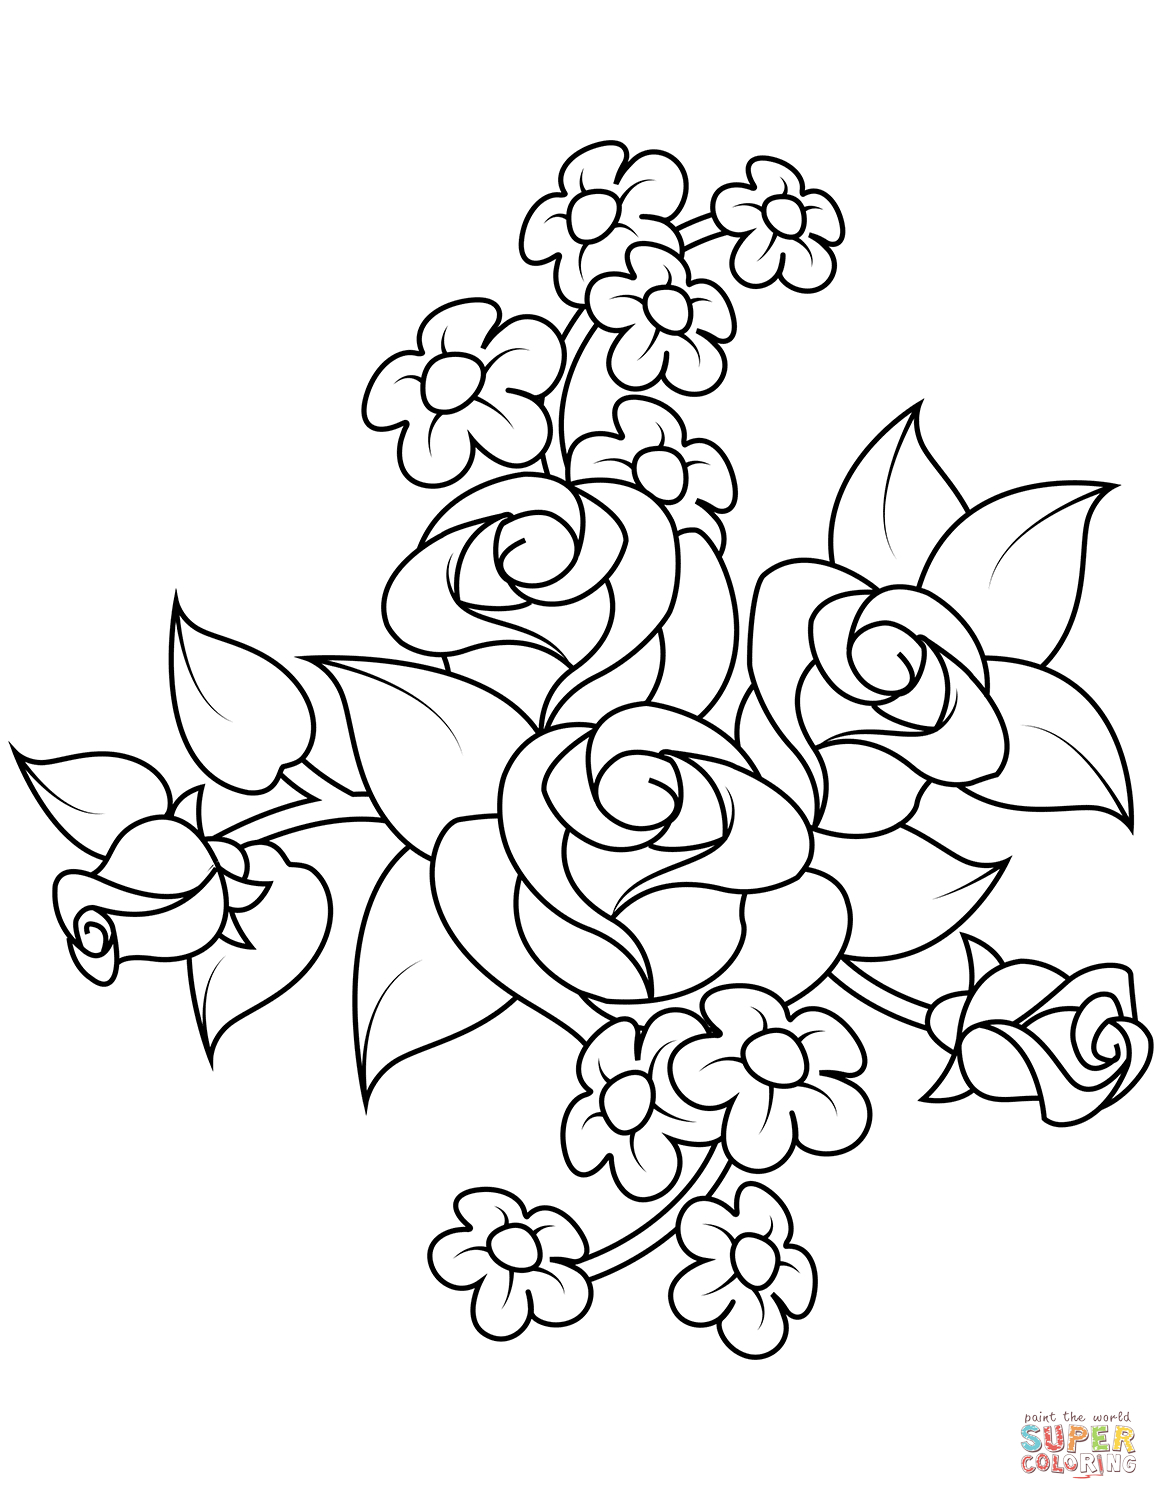 Bouquet Of Flowers Coloring Page Bouquet Of Roses Coloring Page Free Printable Coloring Pages